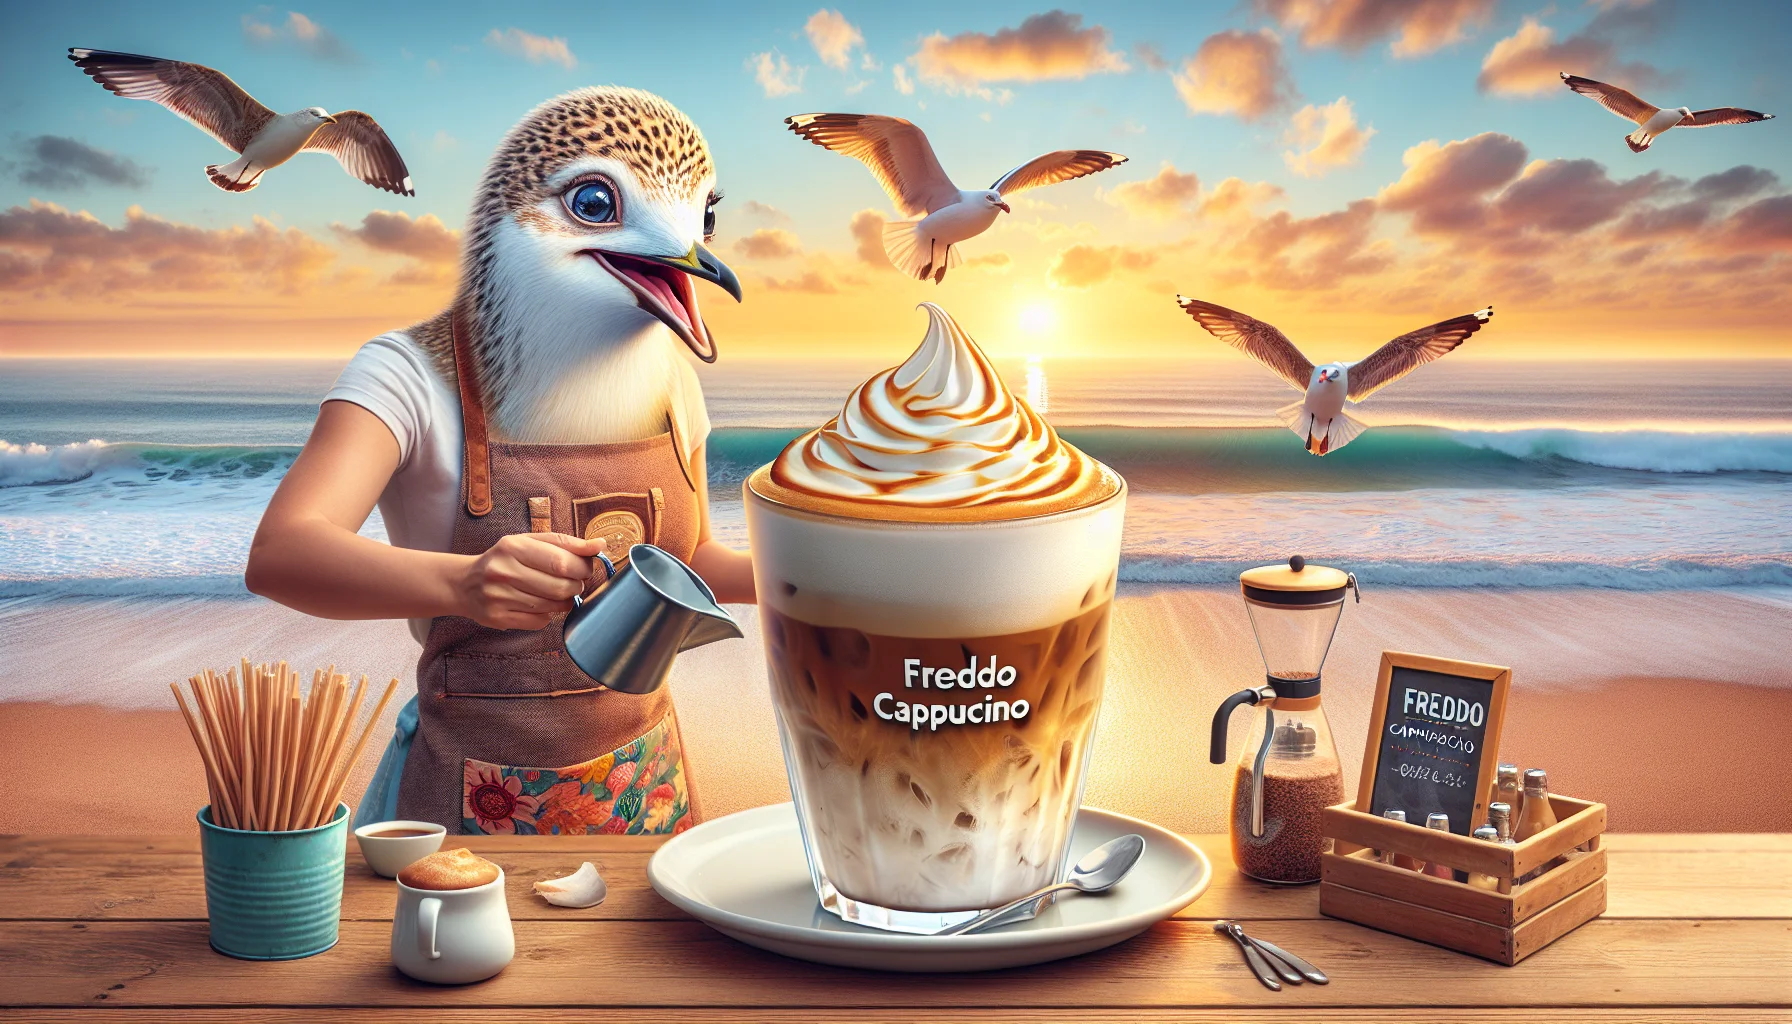 Generate an image that masterfully blends humor and refreshment. Picture a scene of a whimsical coastal café, where a cheerful female sea-gull with shiny feathers, wearing a fun barista's apron, is skillfully preparing a Freddo Cappuccino. The iced cappuccino, with its foamy topping frothing over the brim in an amusing way, invites the viewer to partake. The delicious beverage sits atop a wooden table, with the sea's waves gently undulating in the background under a warmly set morning sunrise. Let the blissful scene stir the viewer's desire to taste the invigorating Freddo cappuccino.